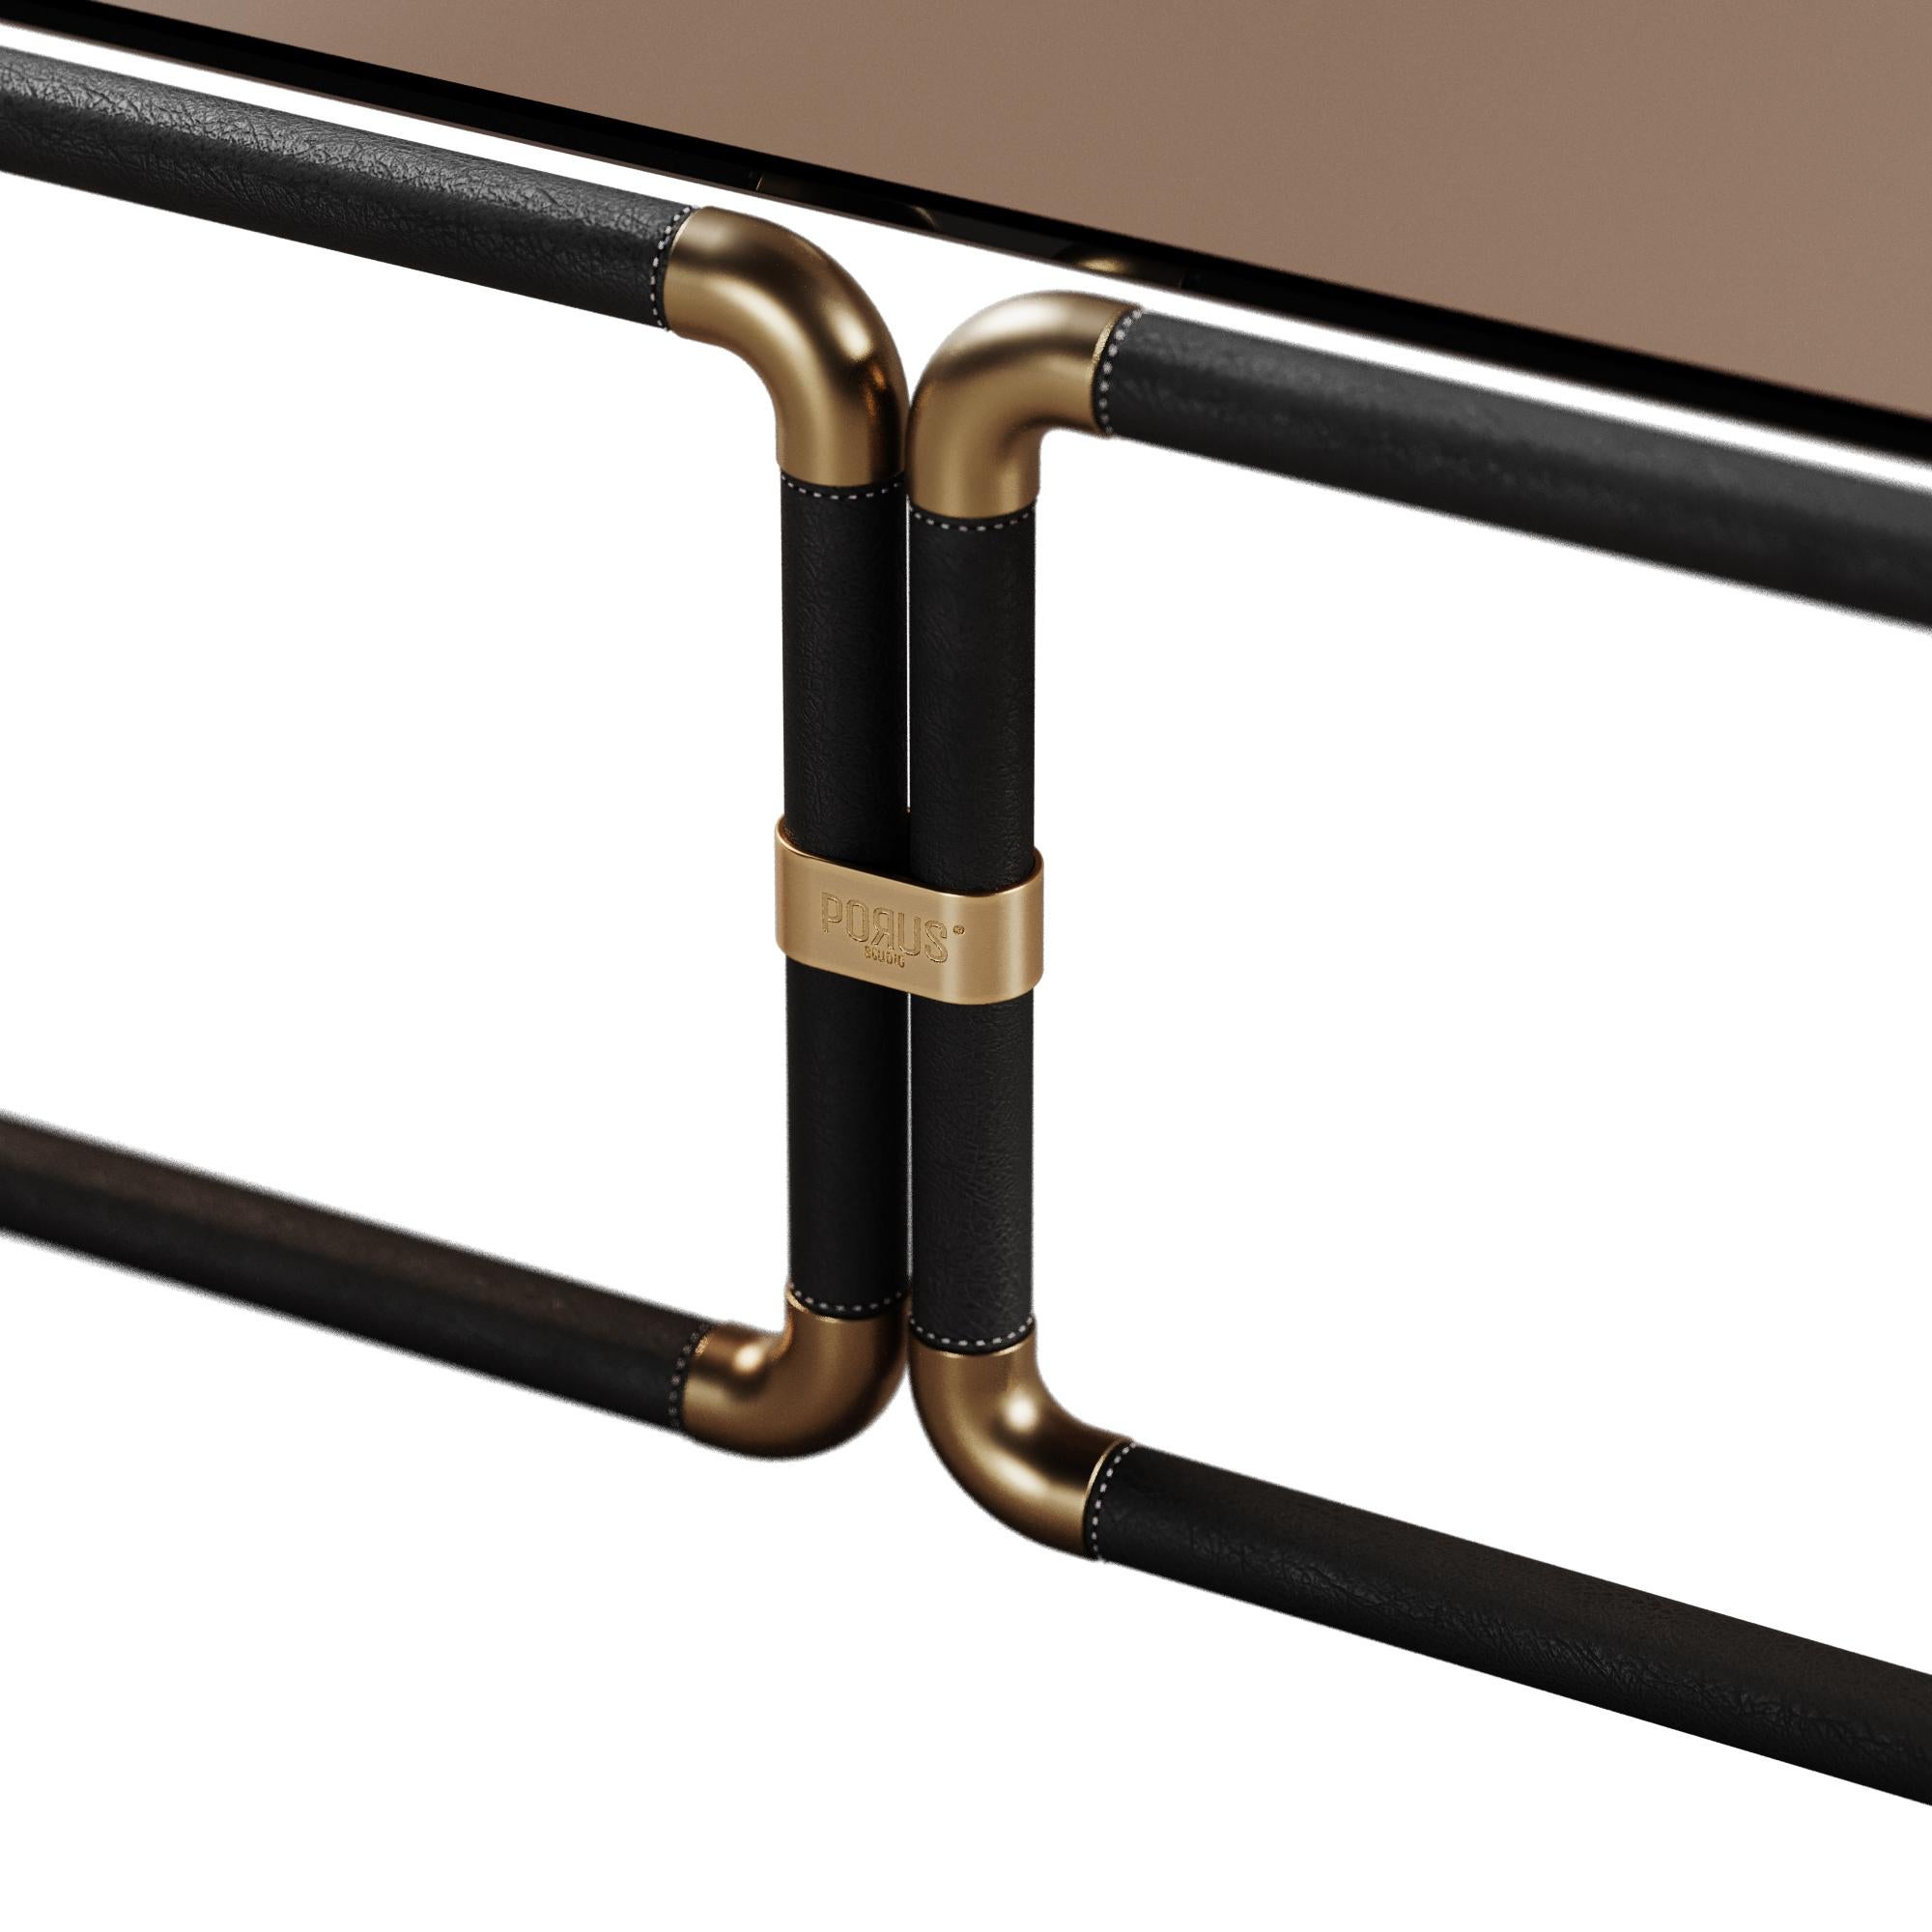 Contemporary 21st Century Dickson Center Table Aged Brushed Brass and Bronze Glass by Porus For Sale